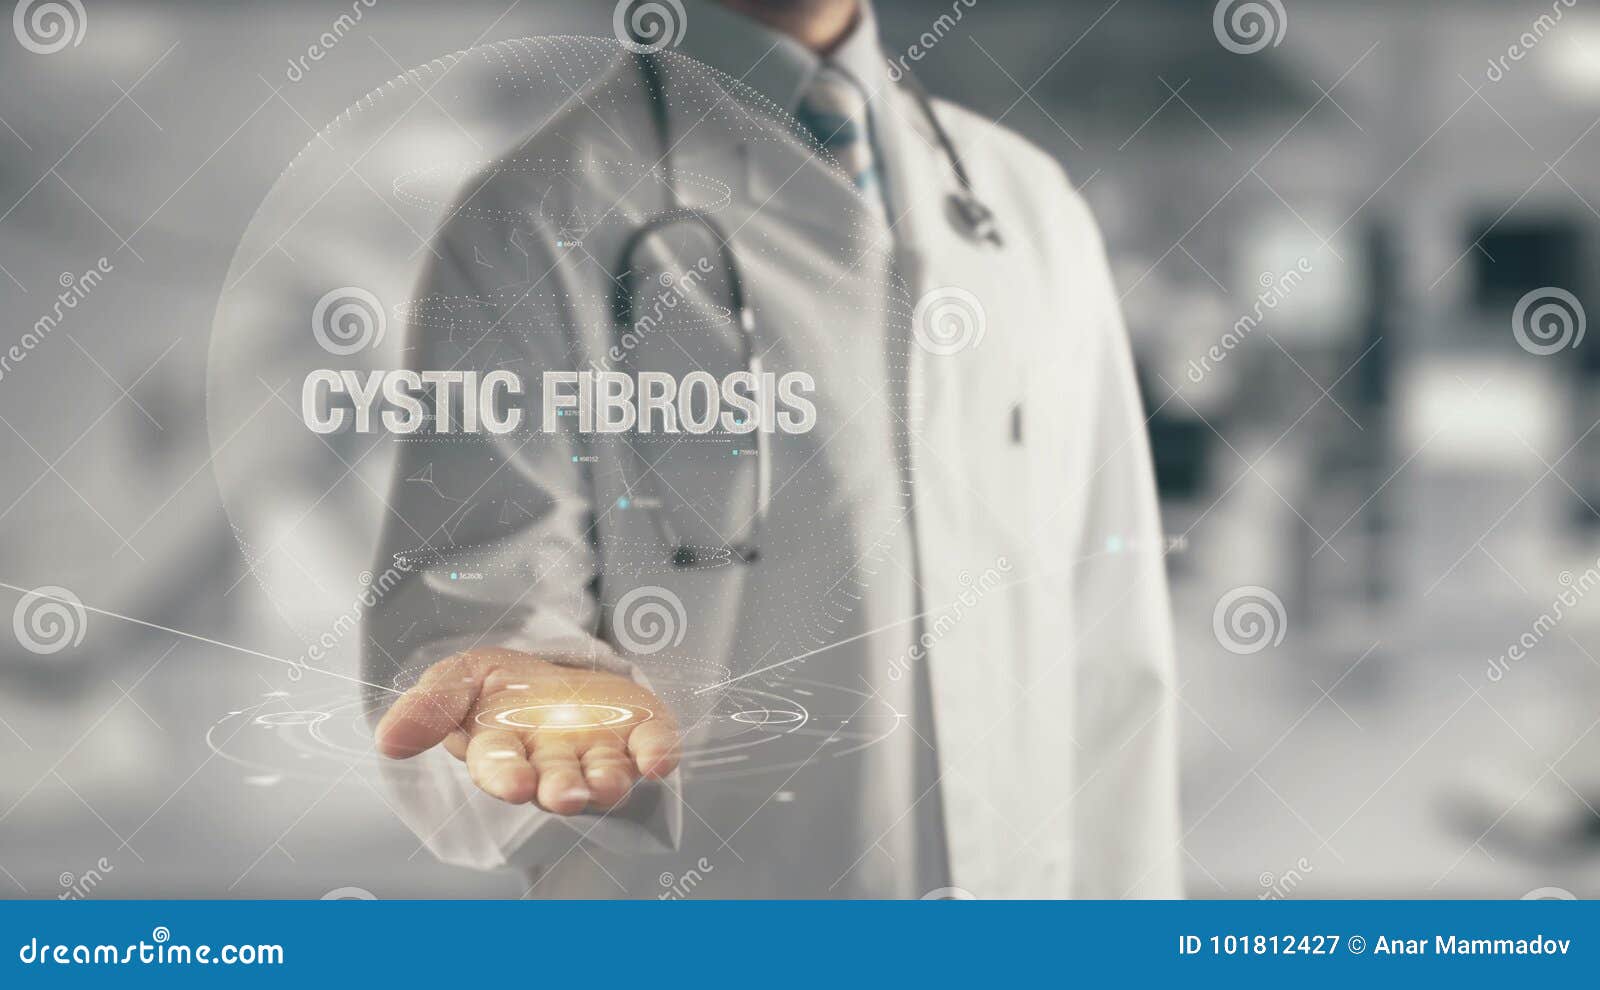 doctor holding in hand cystic fibrosis